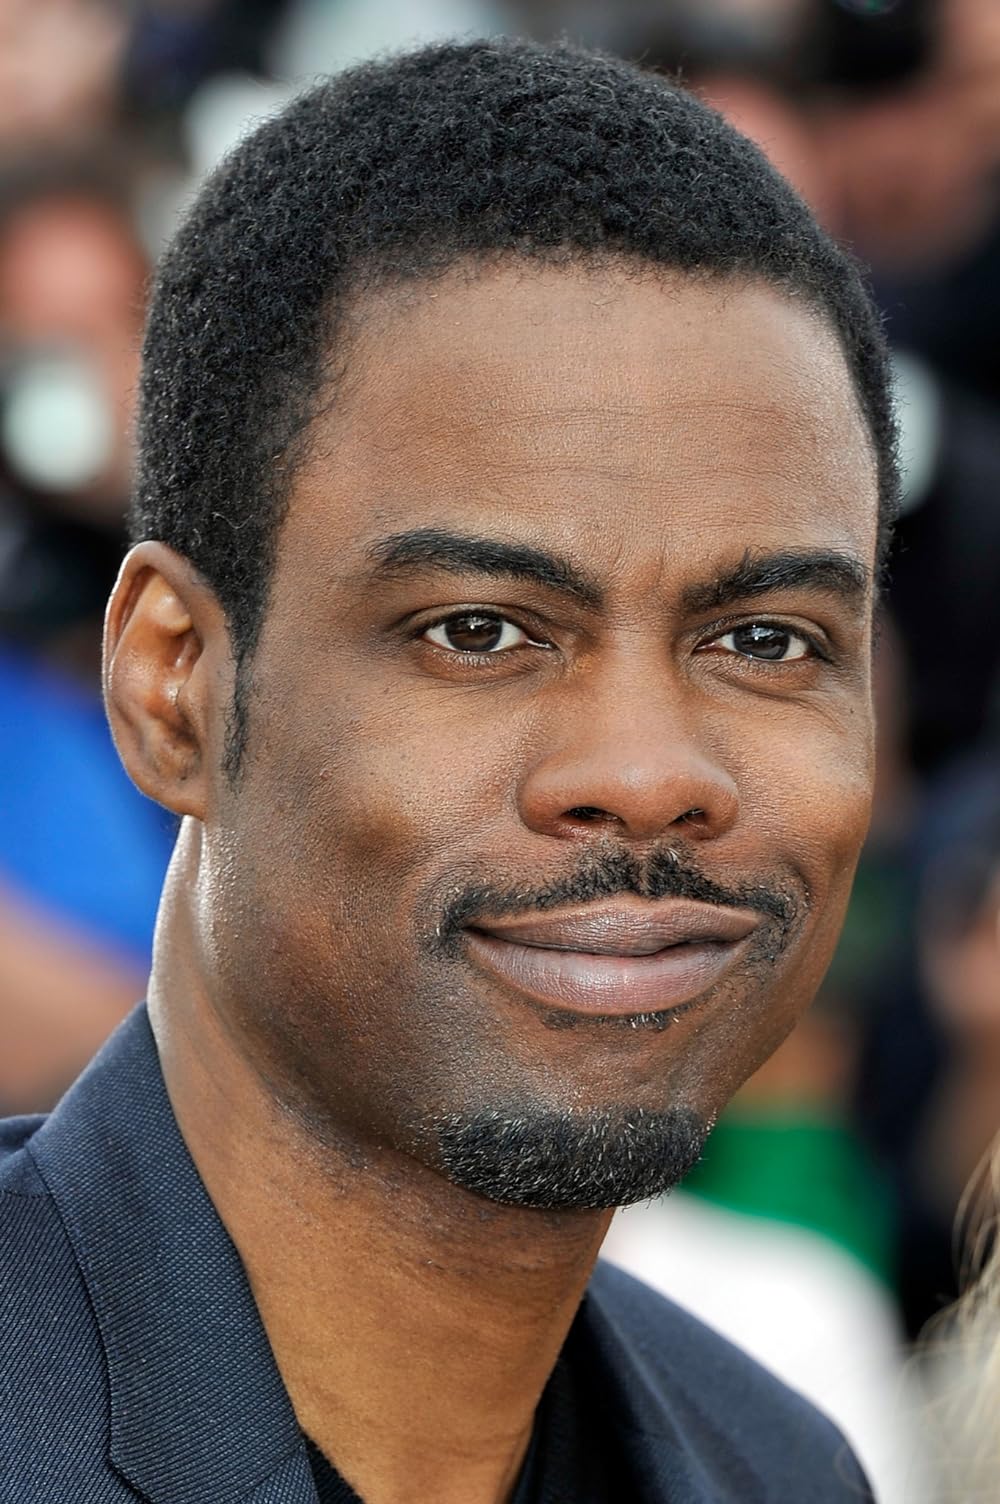 If you can believe it, Chris Rock actually scraped shrimp at Red Lobster.